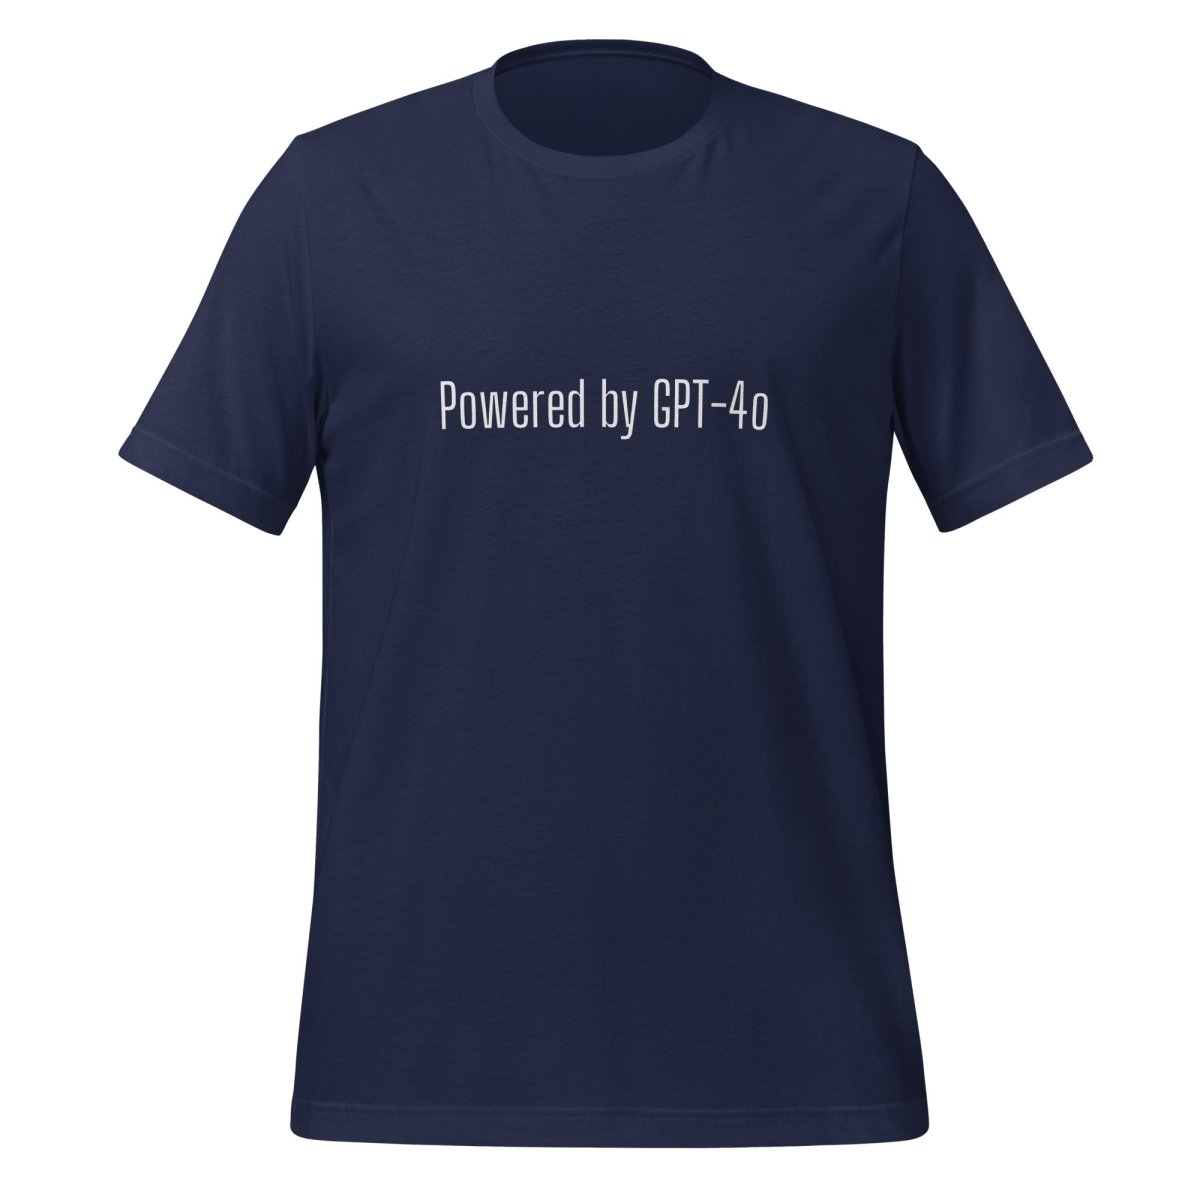 Powered by GPT - 4o T - Shirt 4 (unisex) - Navy - AI Store